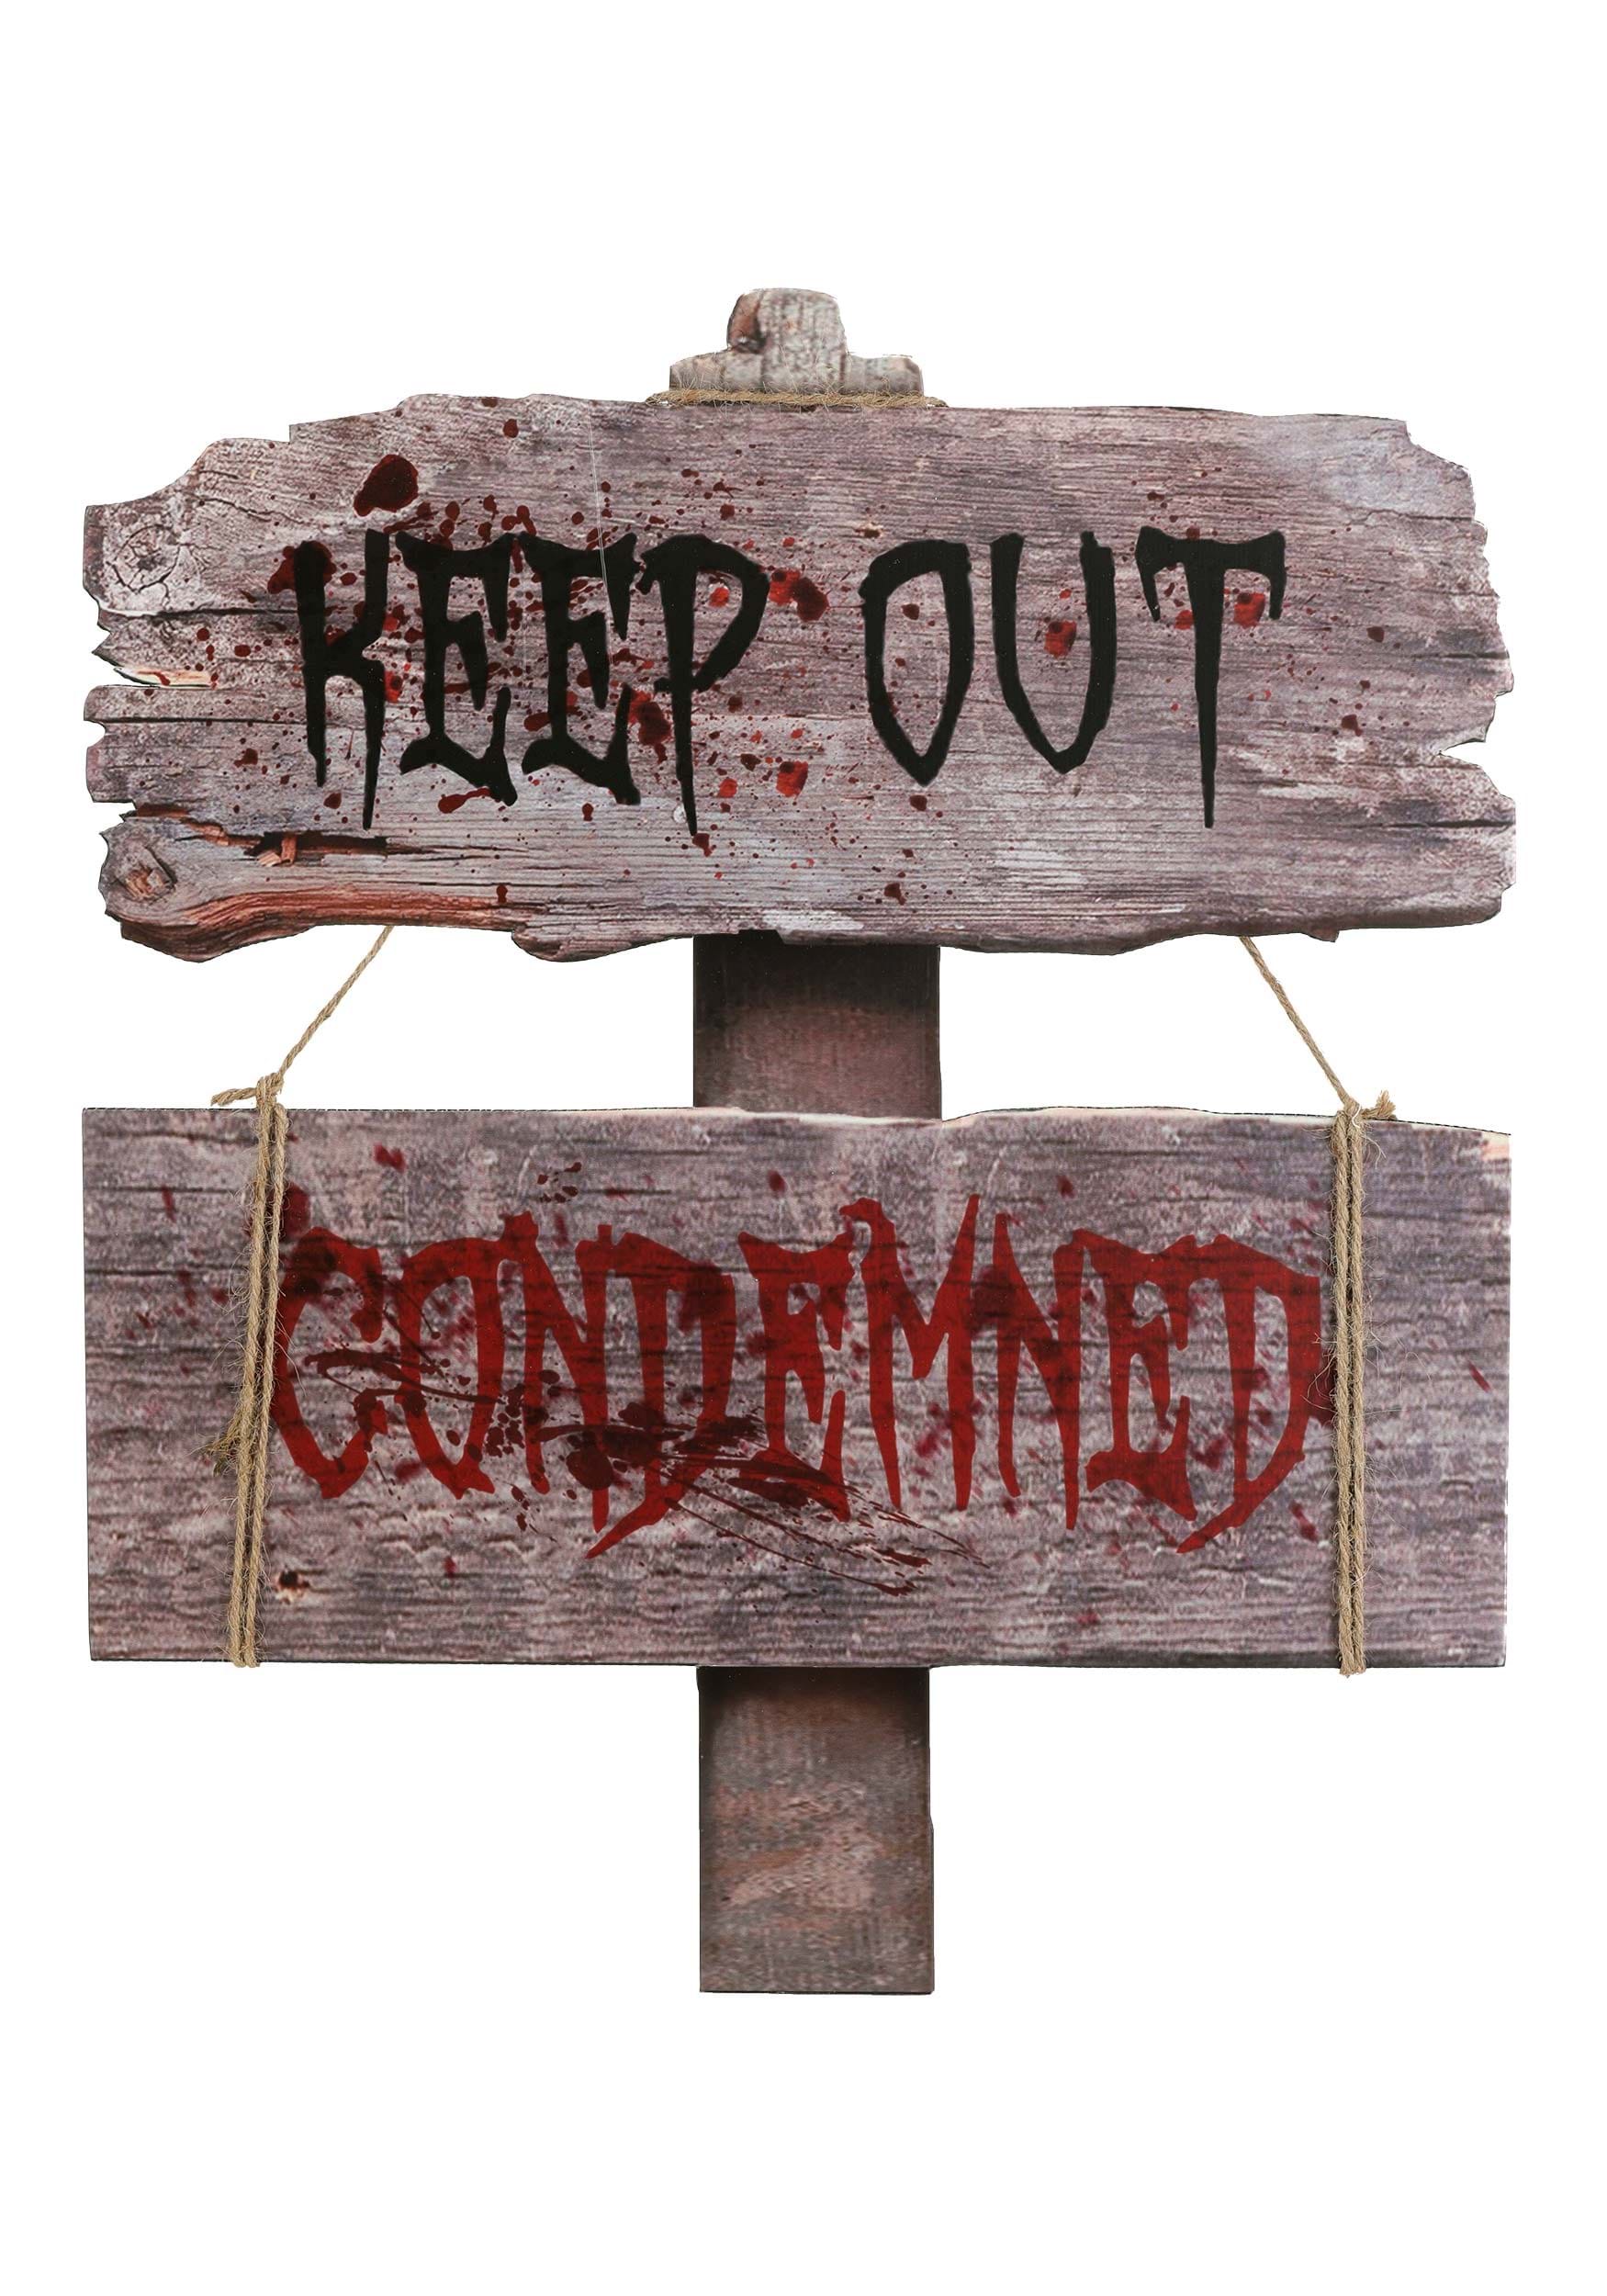 wooden keep out sign